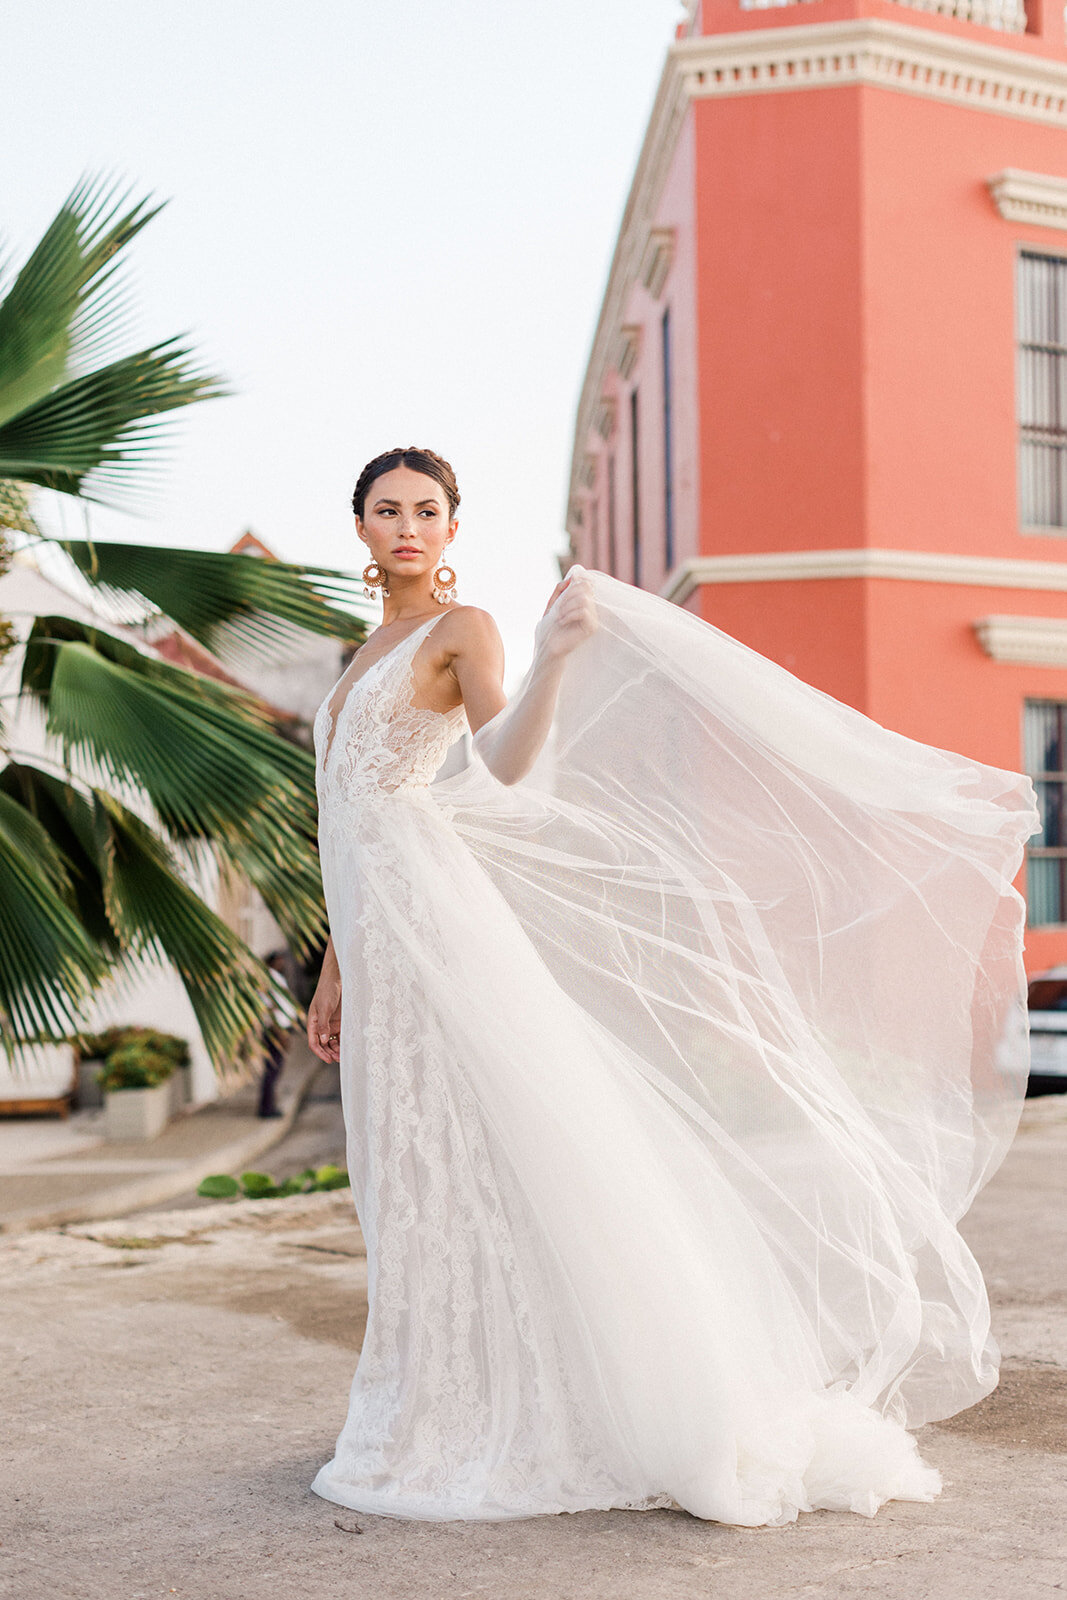 Watters Wedaways Sofitel Cartagena Colombia-Valorie Darling Photography-DF1A3336